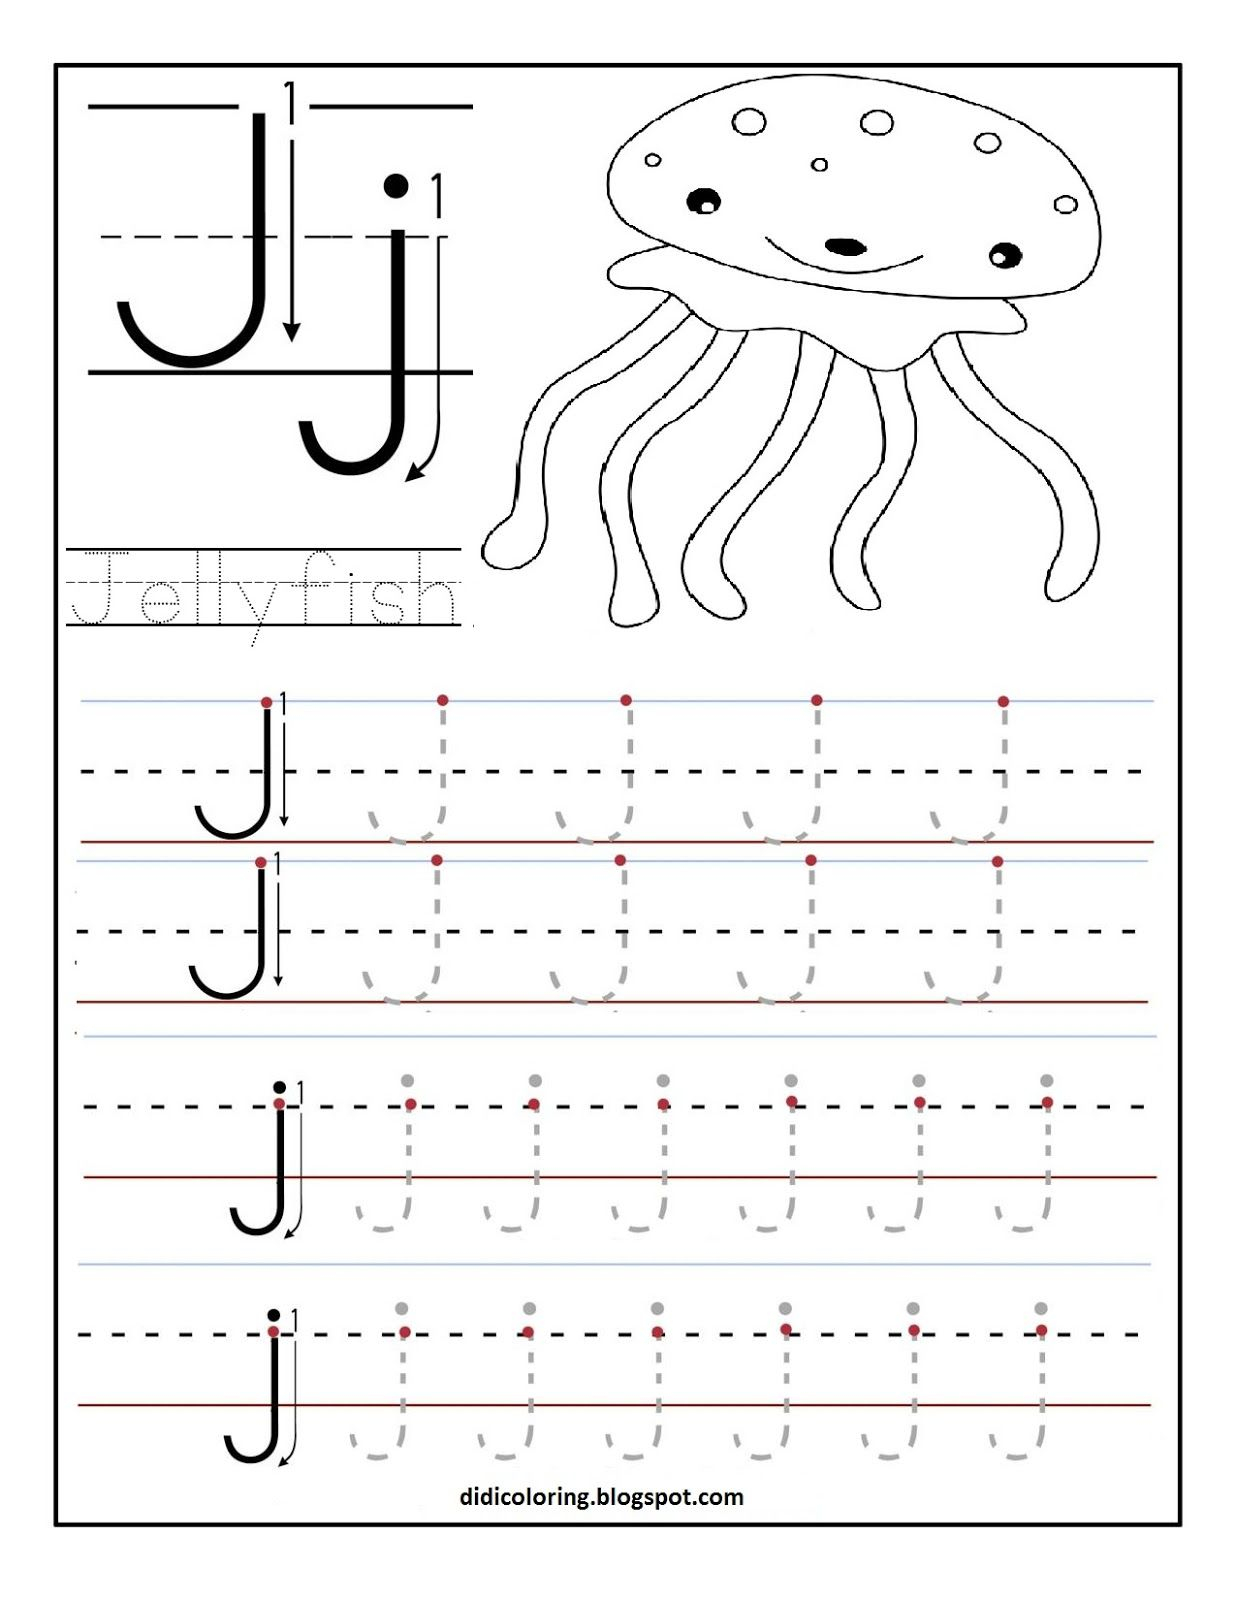 Free Printable Worksheet Letter J For Your Child To Learn